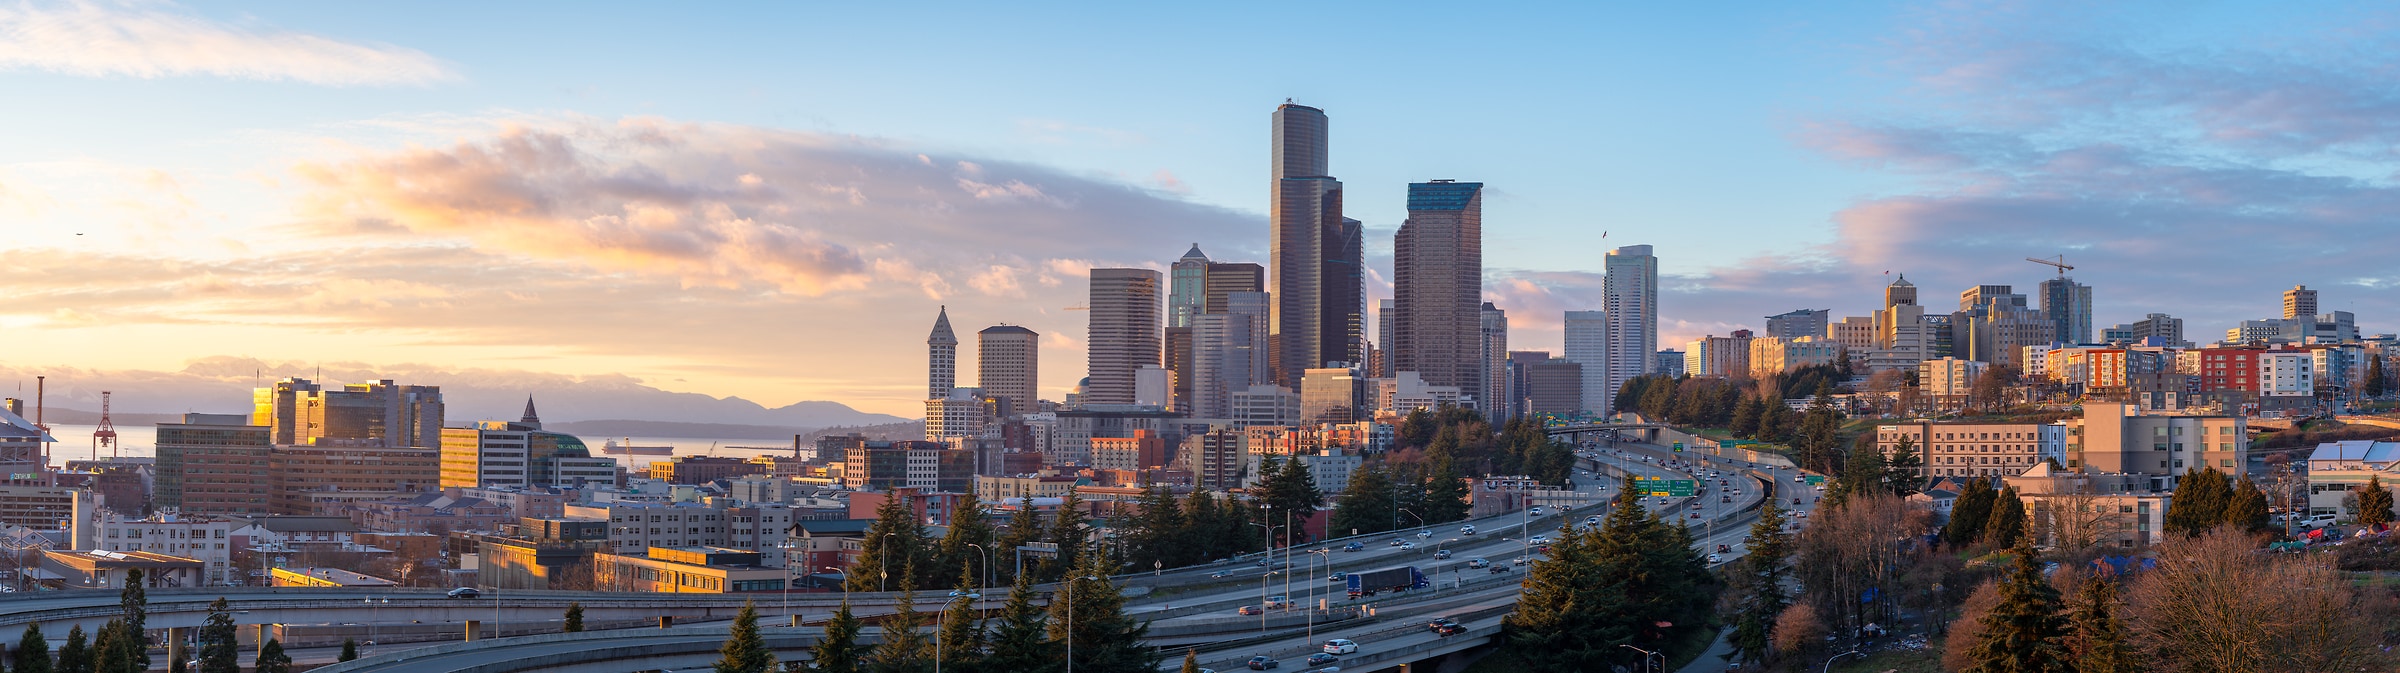 206 megapixels! A very high resolution, large-format VAST photo print of the Seattle, Washington skyline at sunset with highways in the foreground; cityscape photograph created by Greg Probst in Seattle, Washington